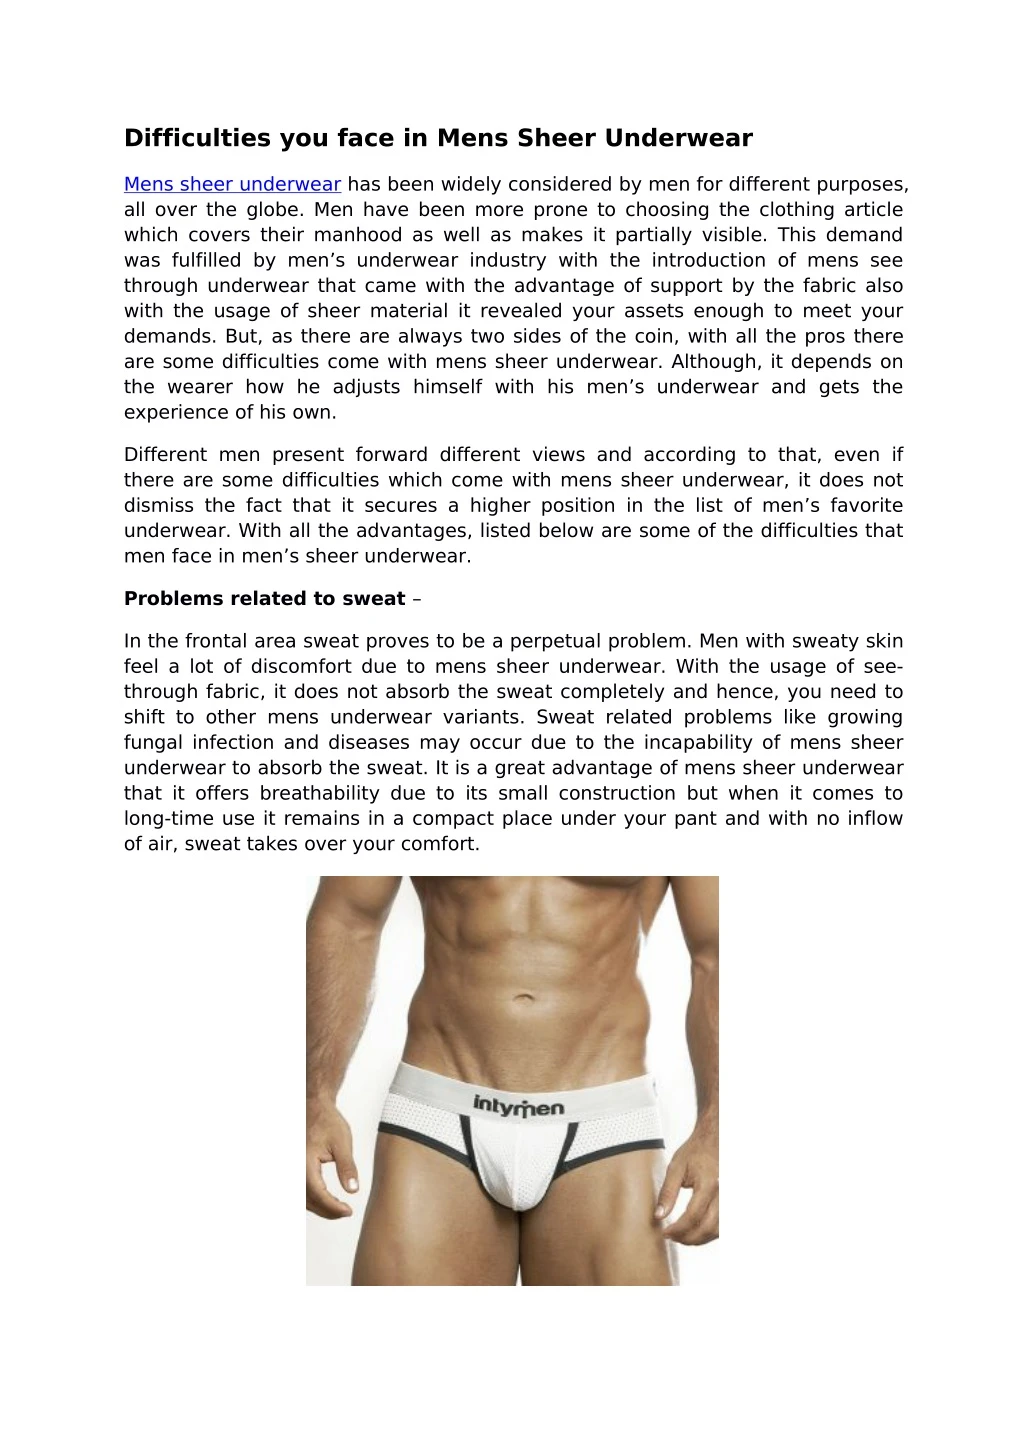 difficulties you face in mens sheer underwear